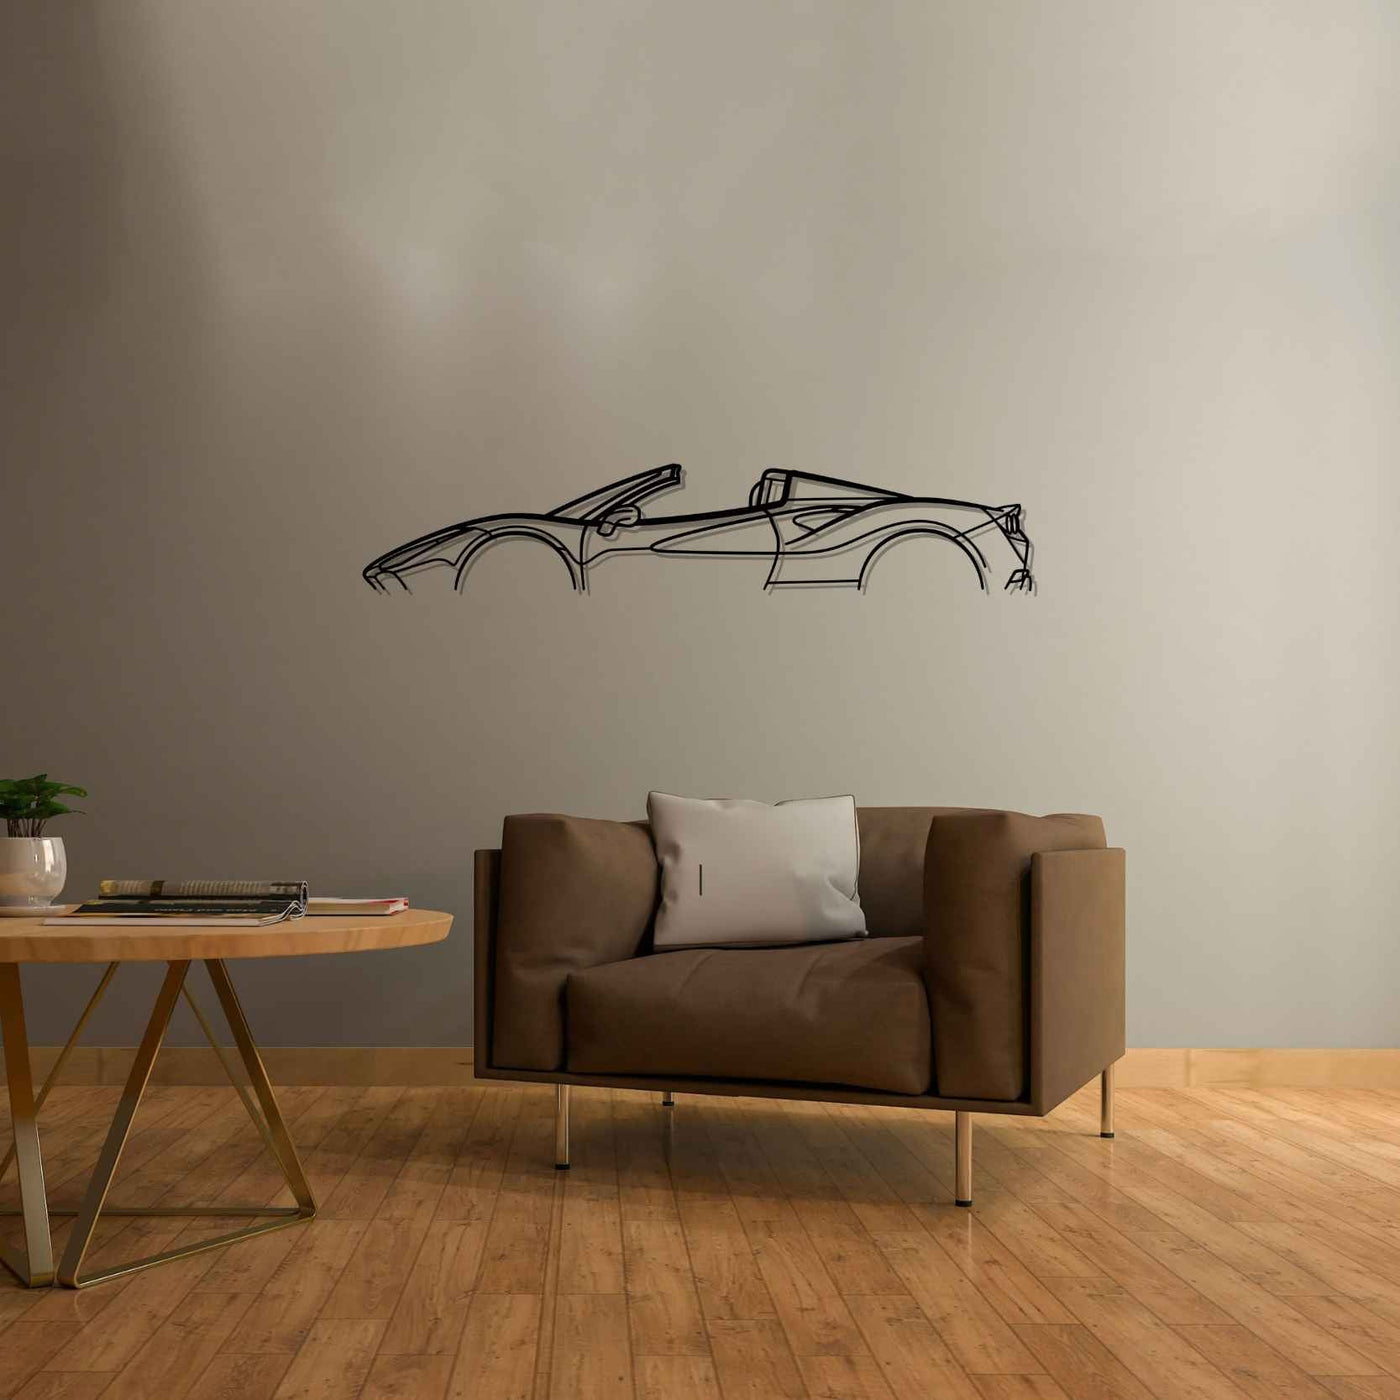 F8 Spider Classic Silhouette Metal Wall Art